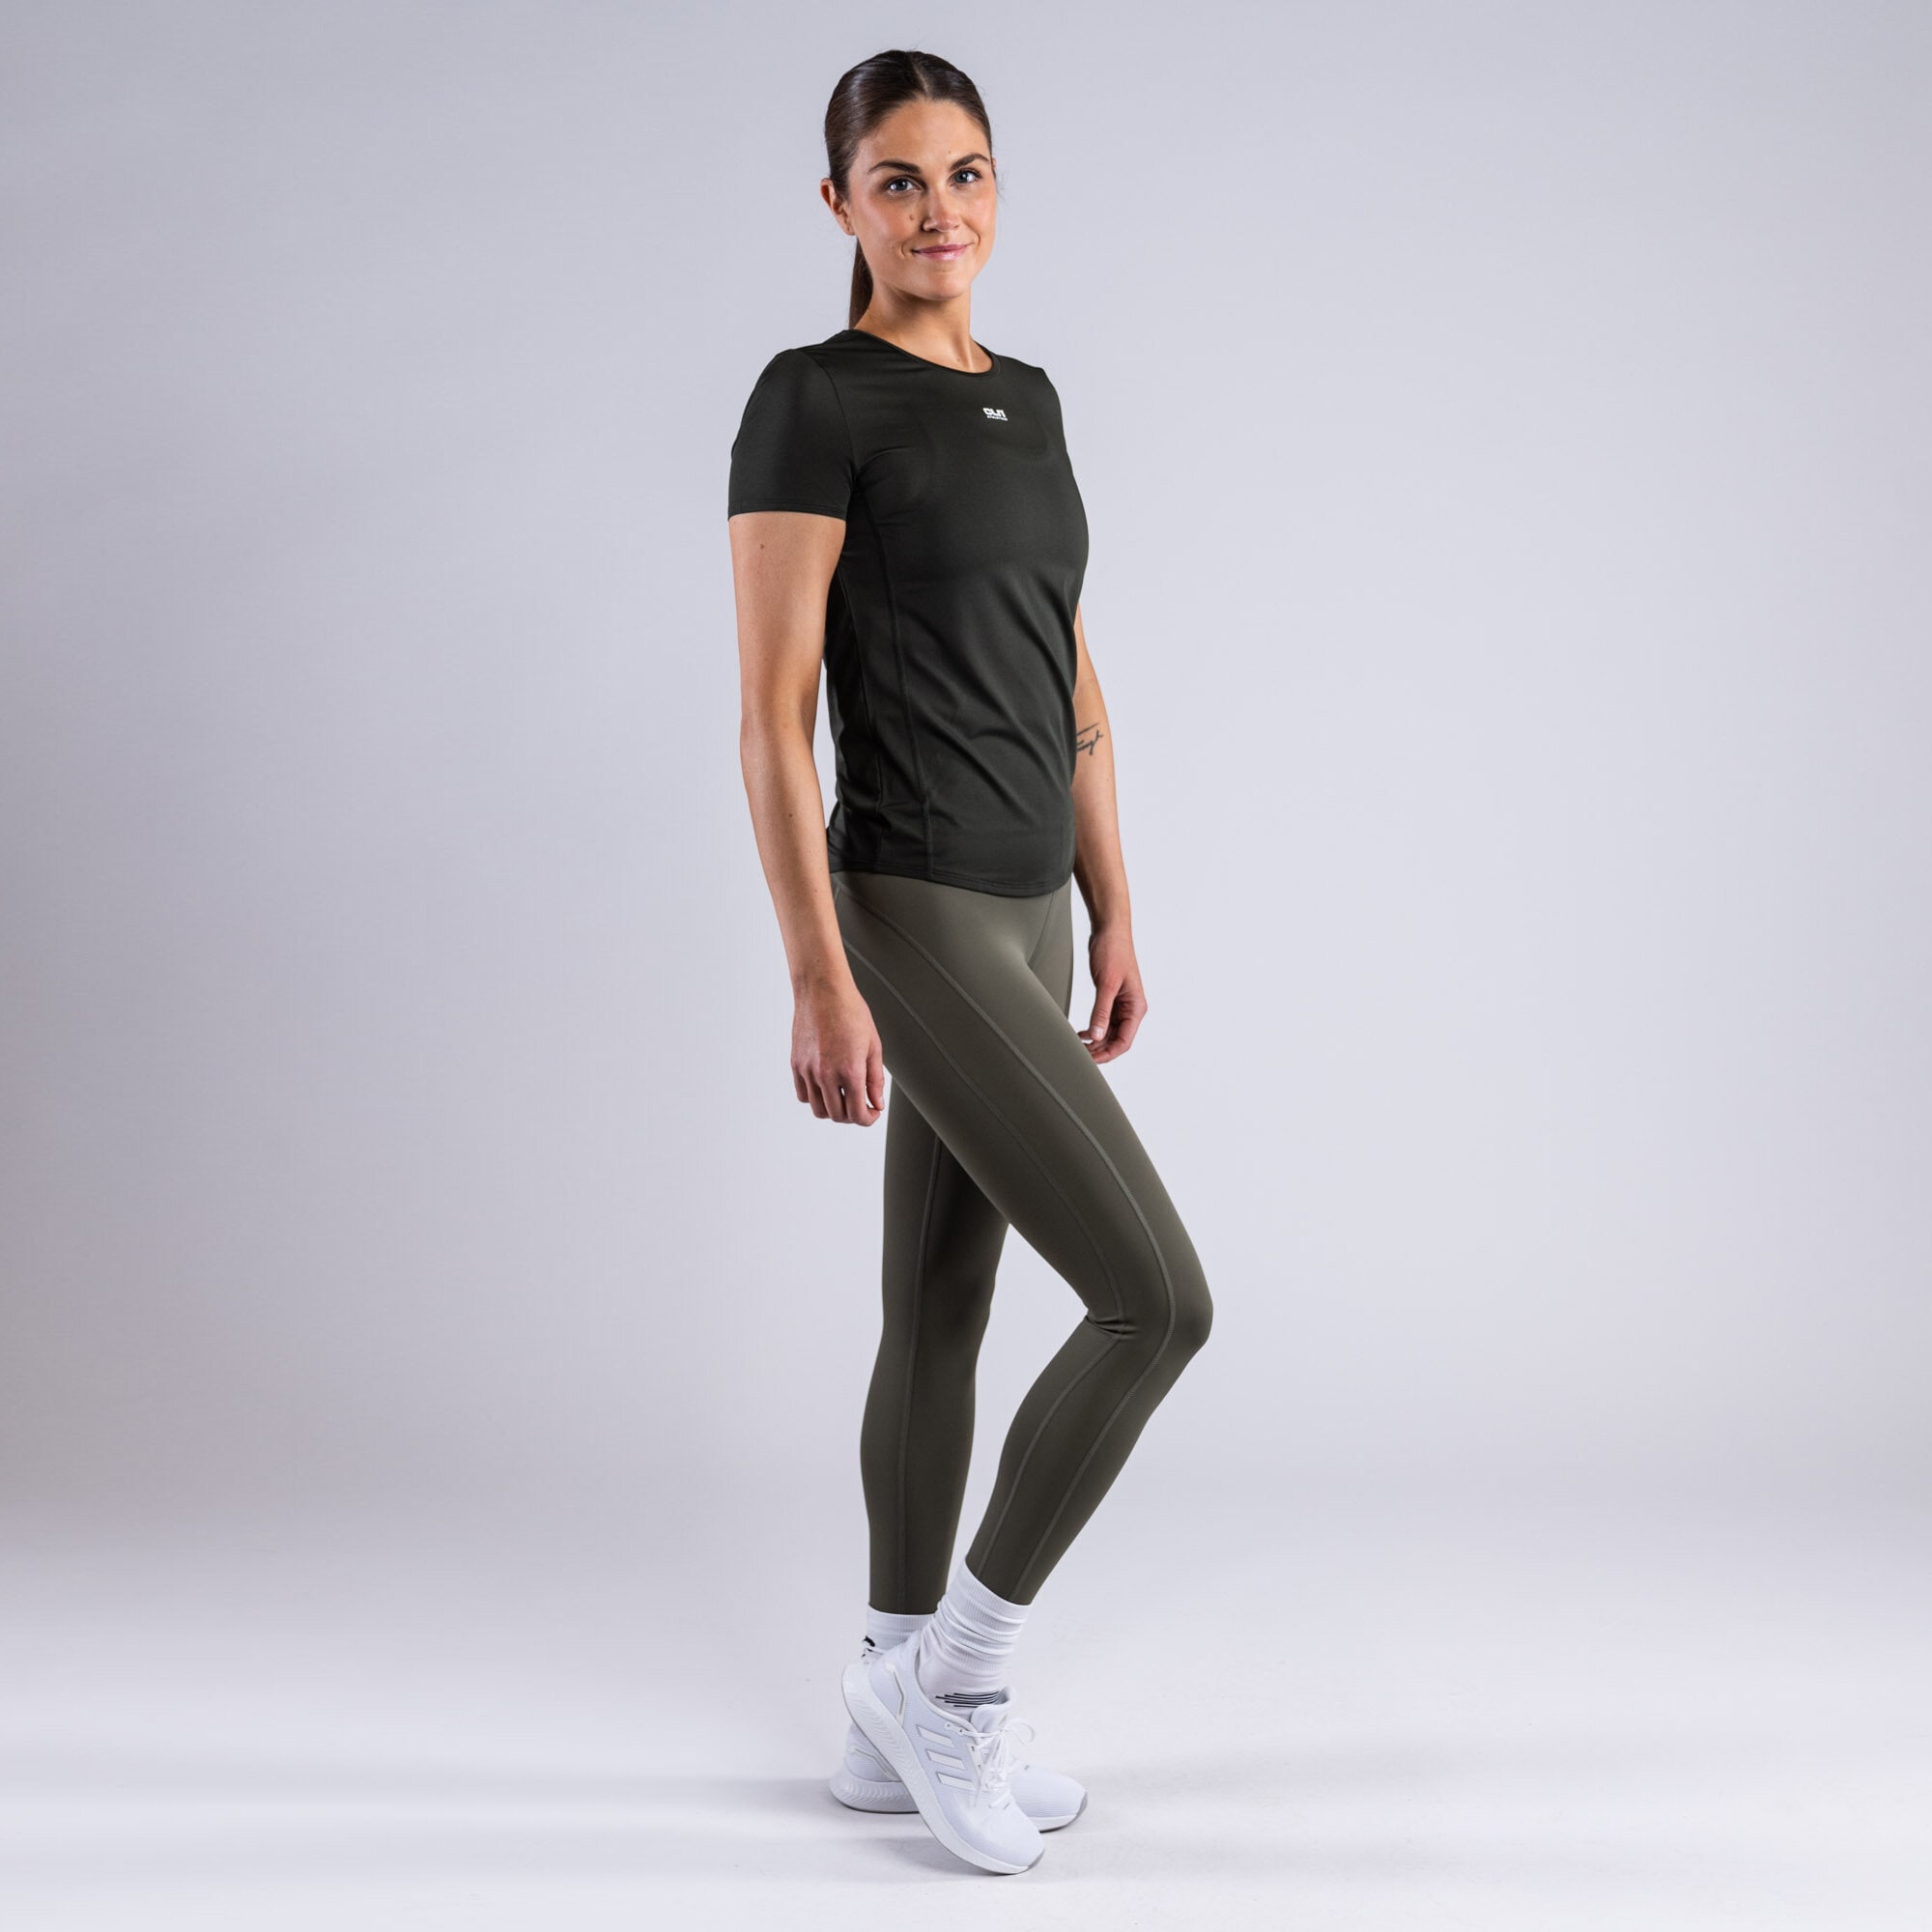 Vitality tights Dusty olive